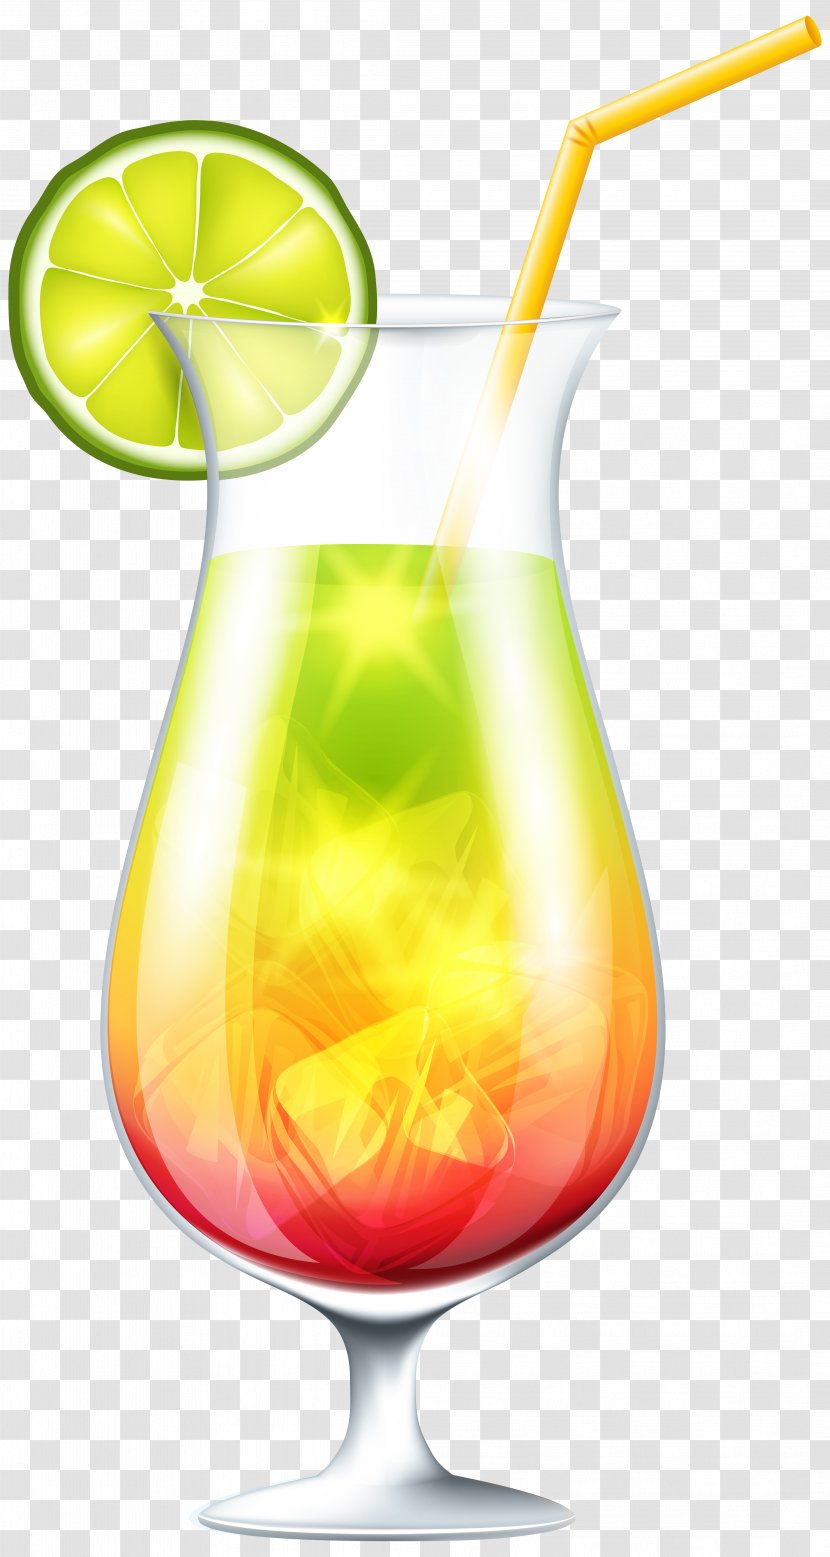 Cocktail Juice Champagne Drink Clip Art - Drawing - With Lime Image Transparent PNG